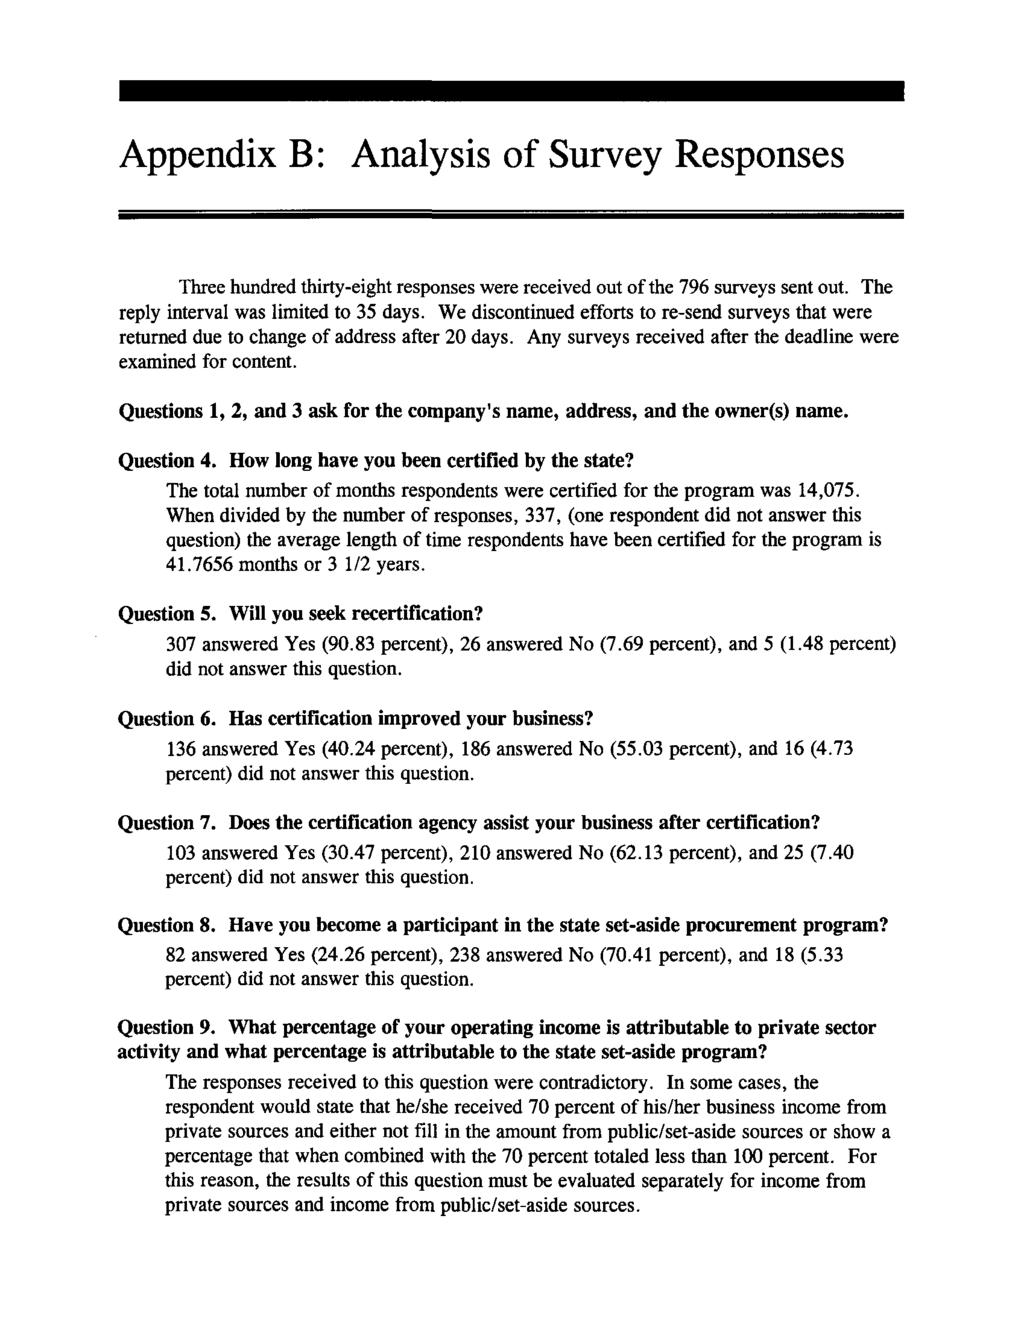 Appendix B: Analysis of Survey Responses Three hundred thirty-eight responses were received out of the 796 surveys sent out. The reply interval was limited to 35 days.